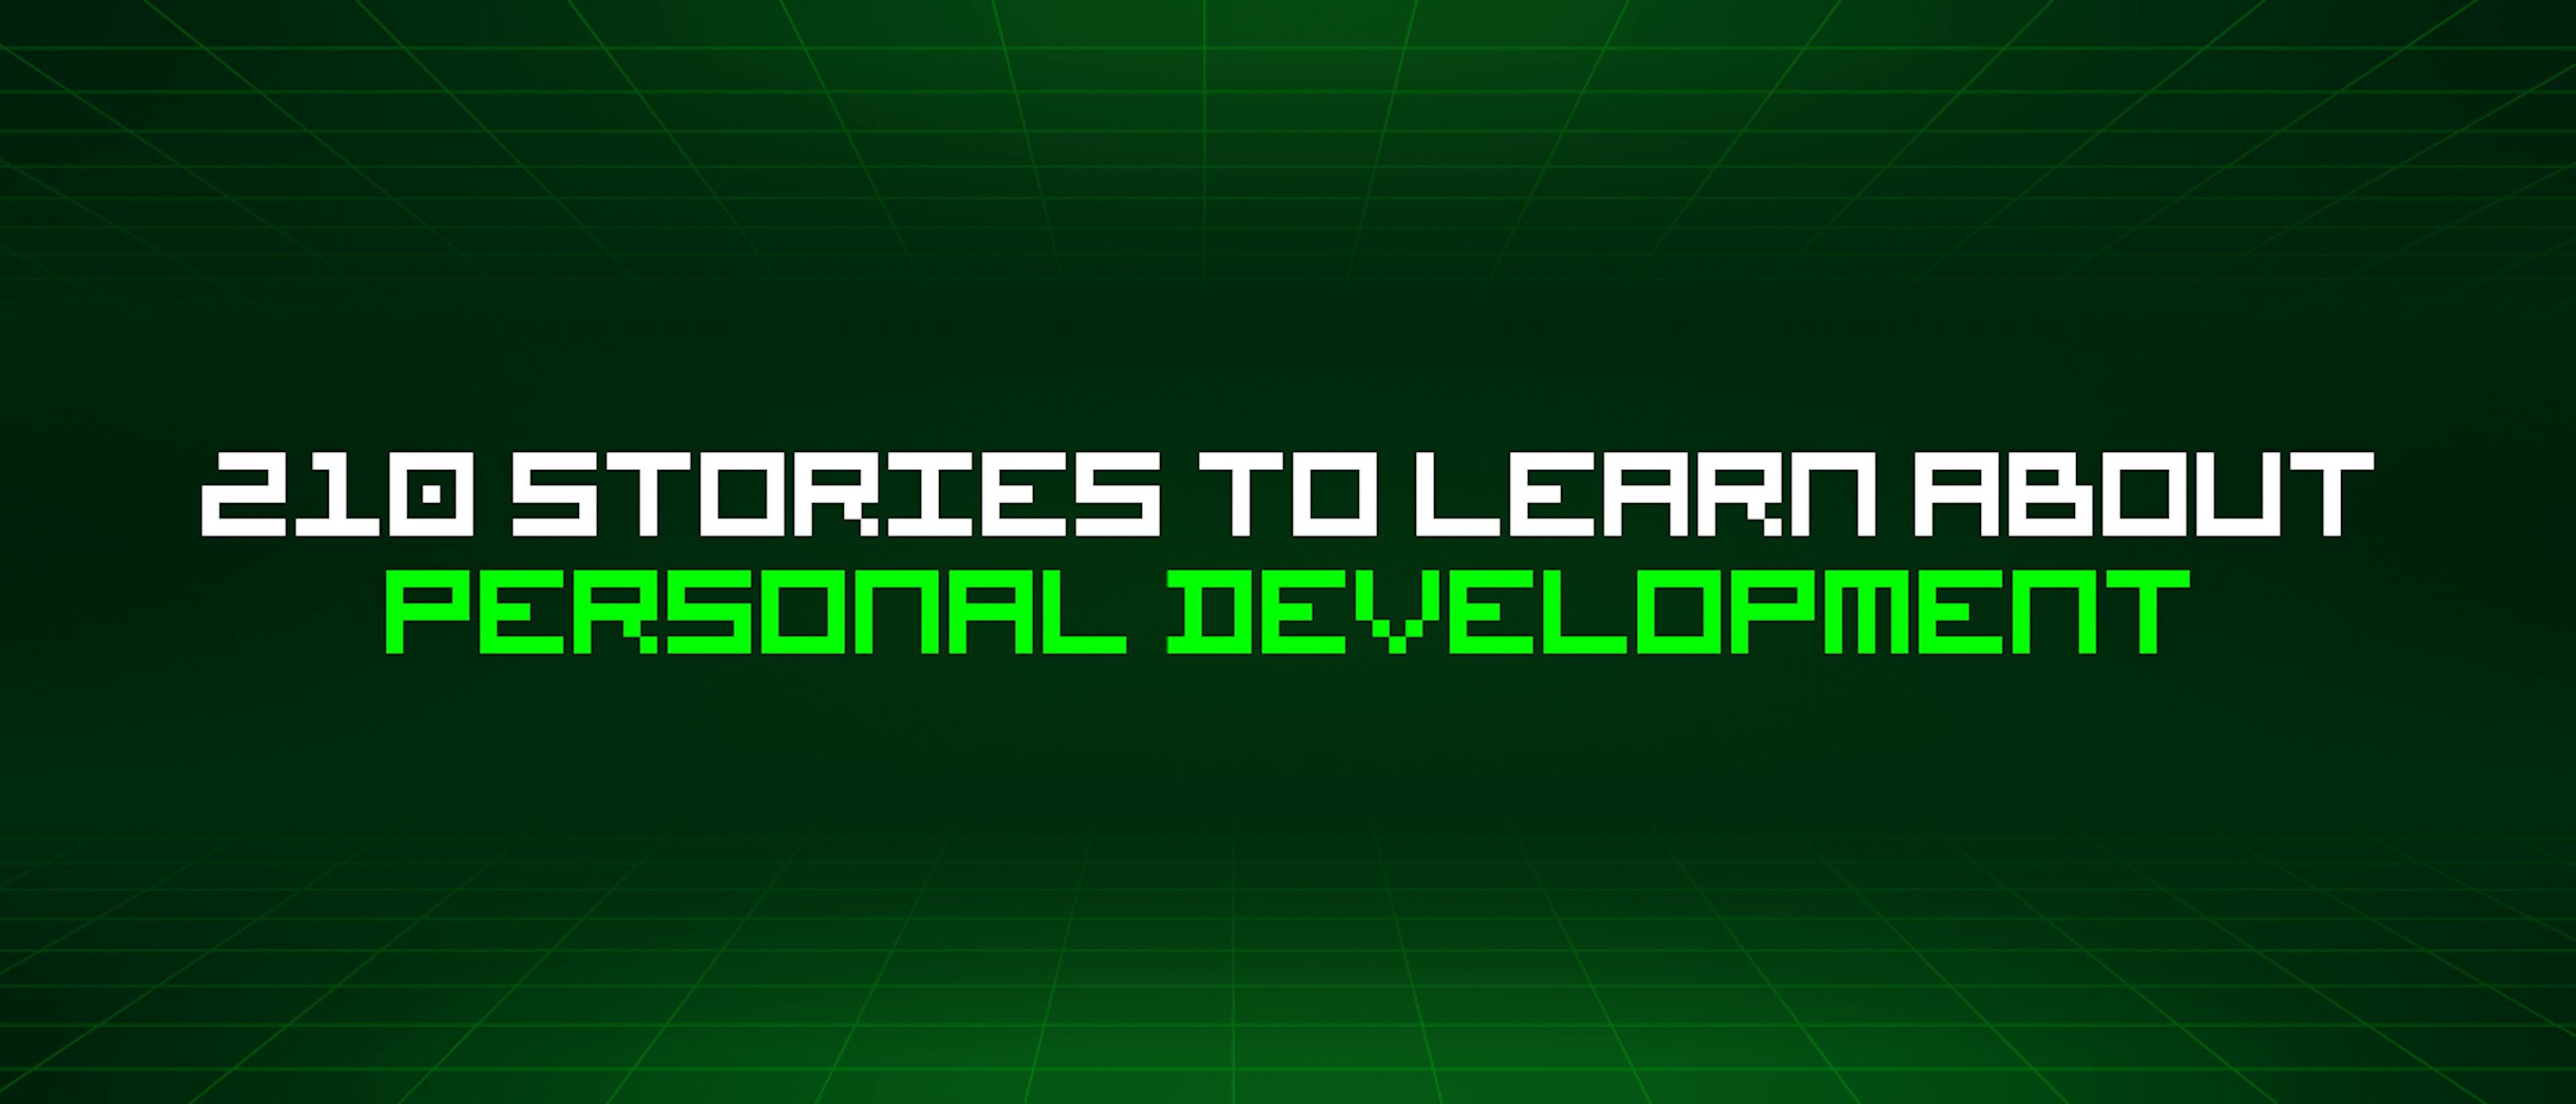 featured image - 210 Stories To Learn About Personal Development